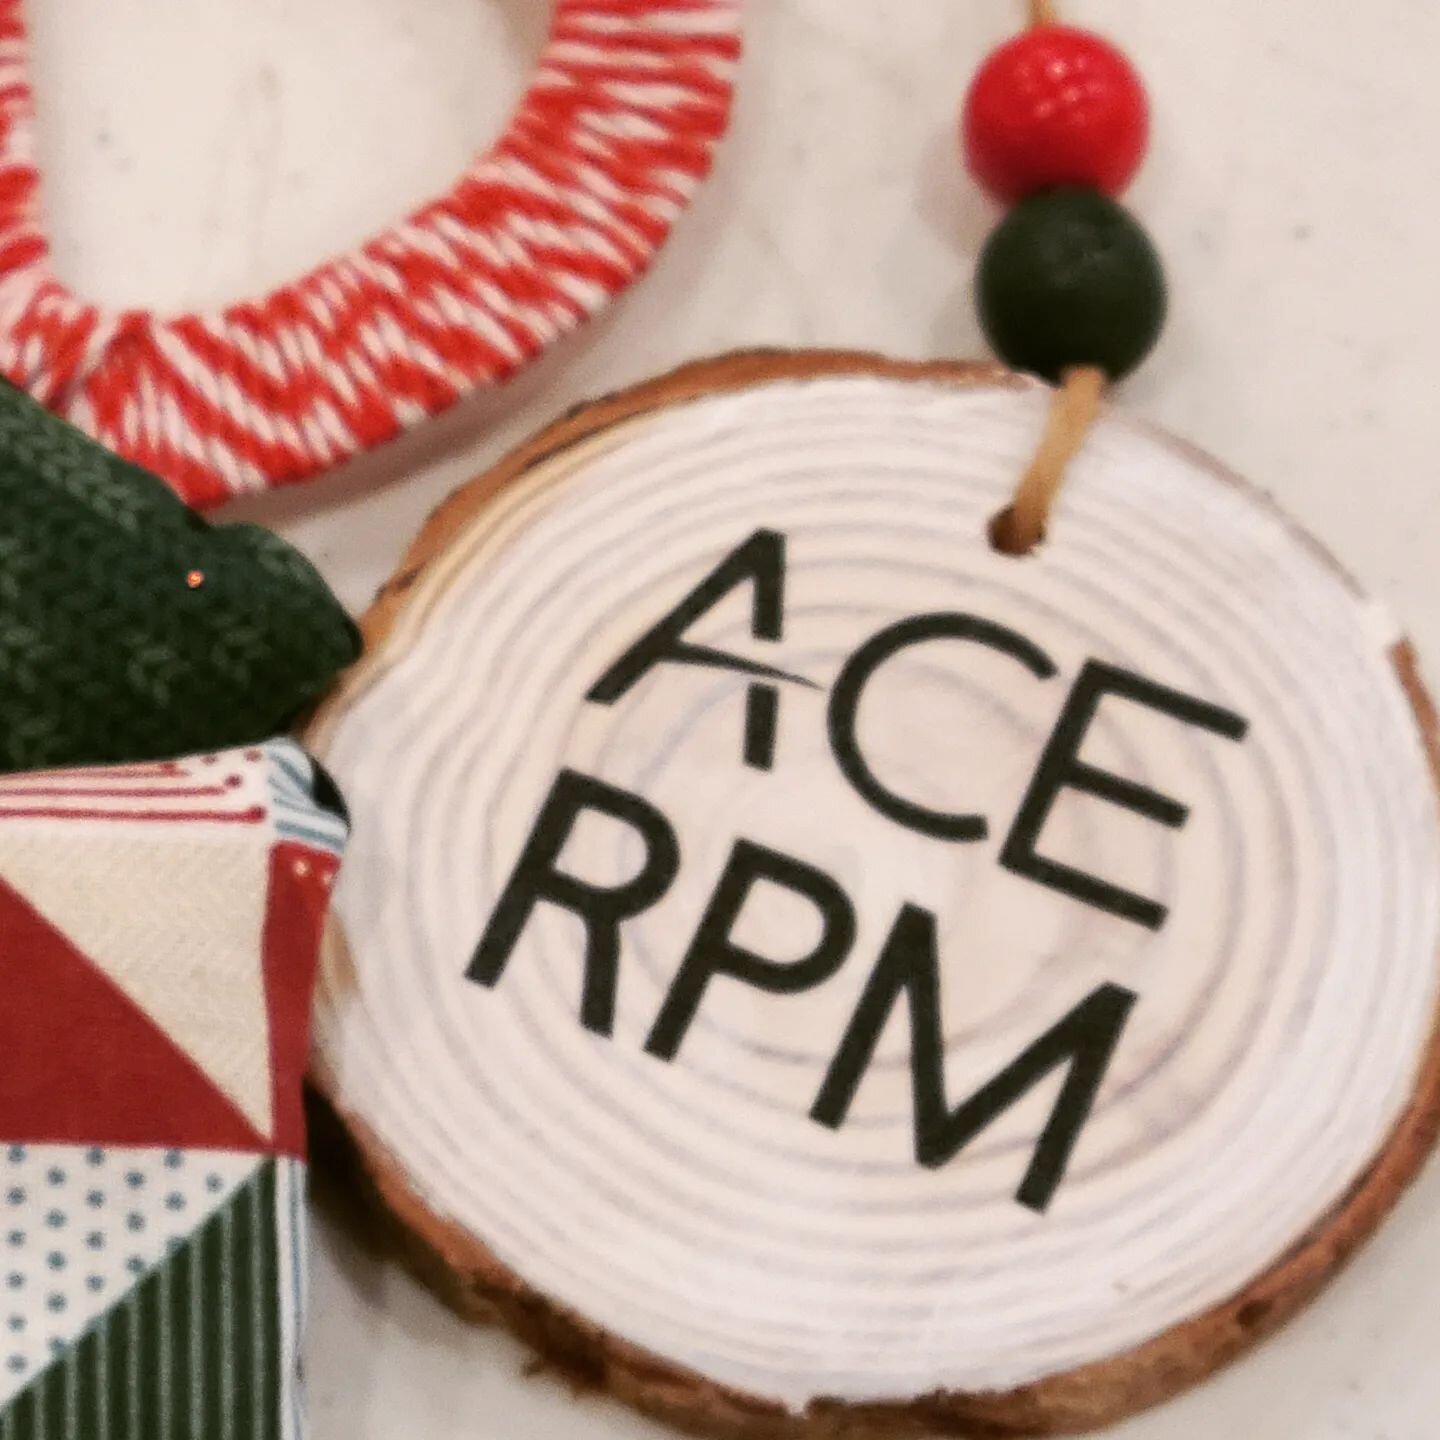 Merry Christmas to all those who celebrate, from the ACE family to yours!